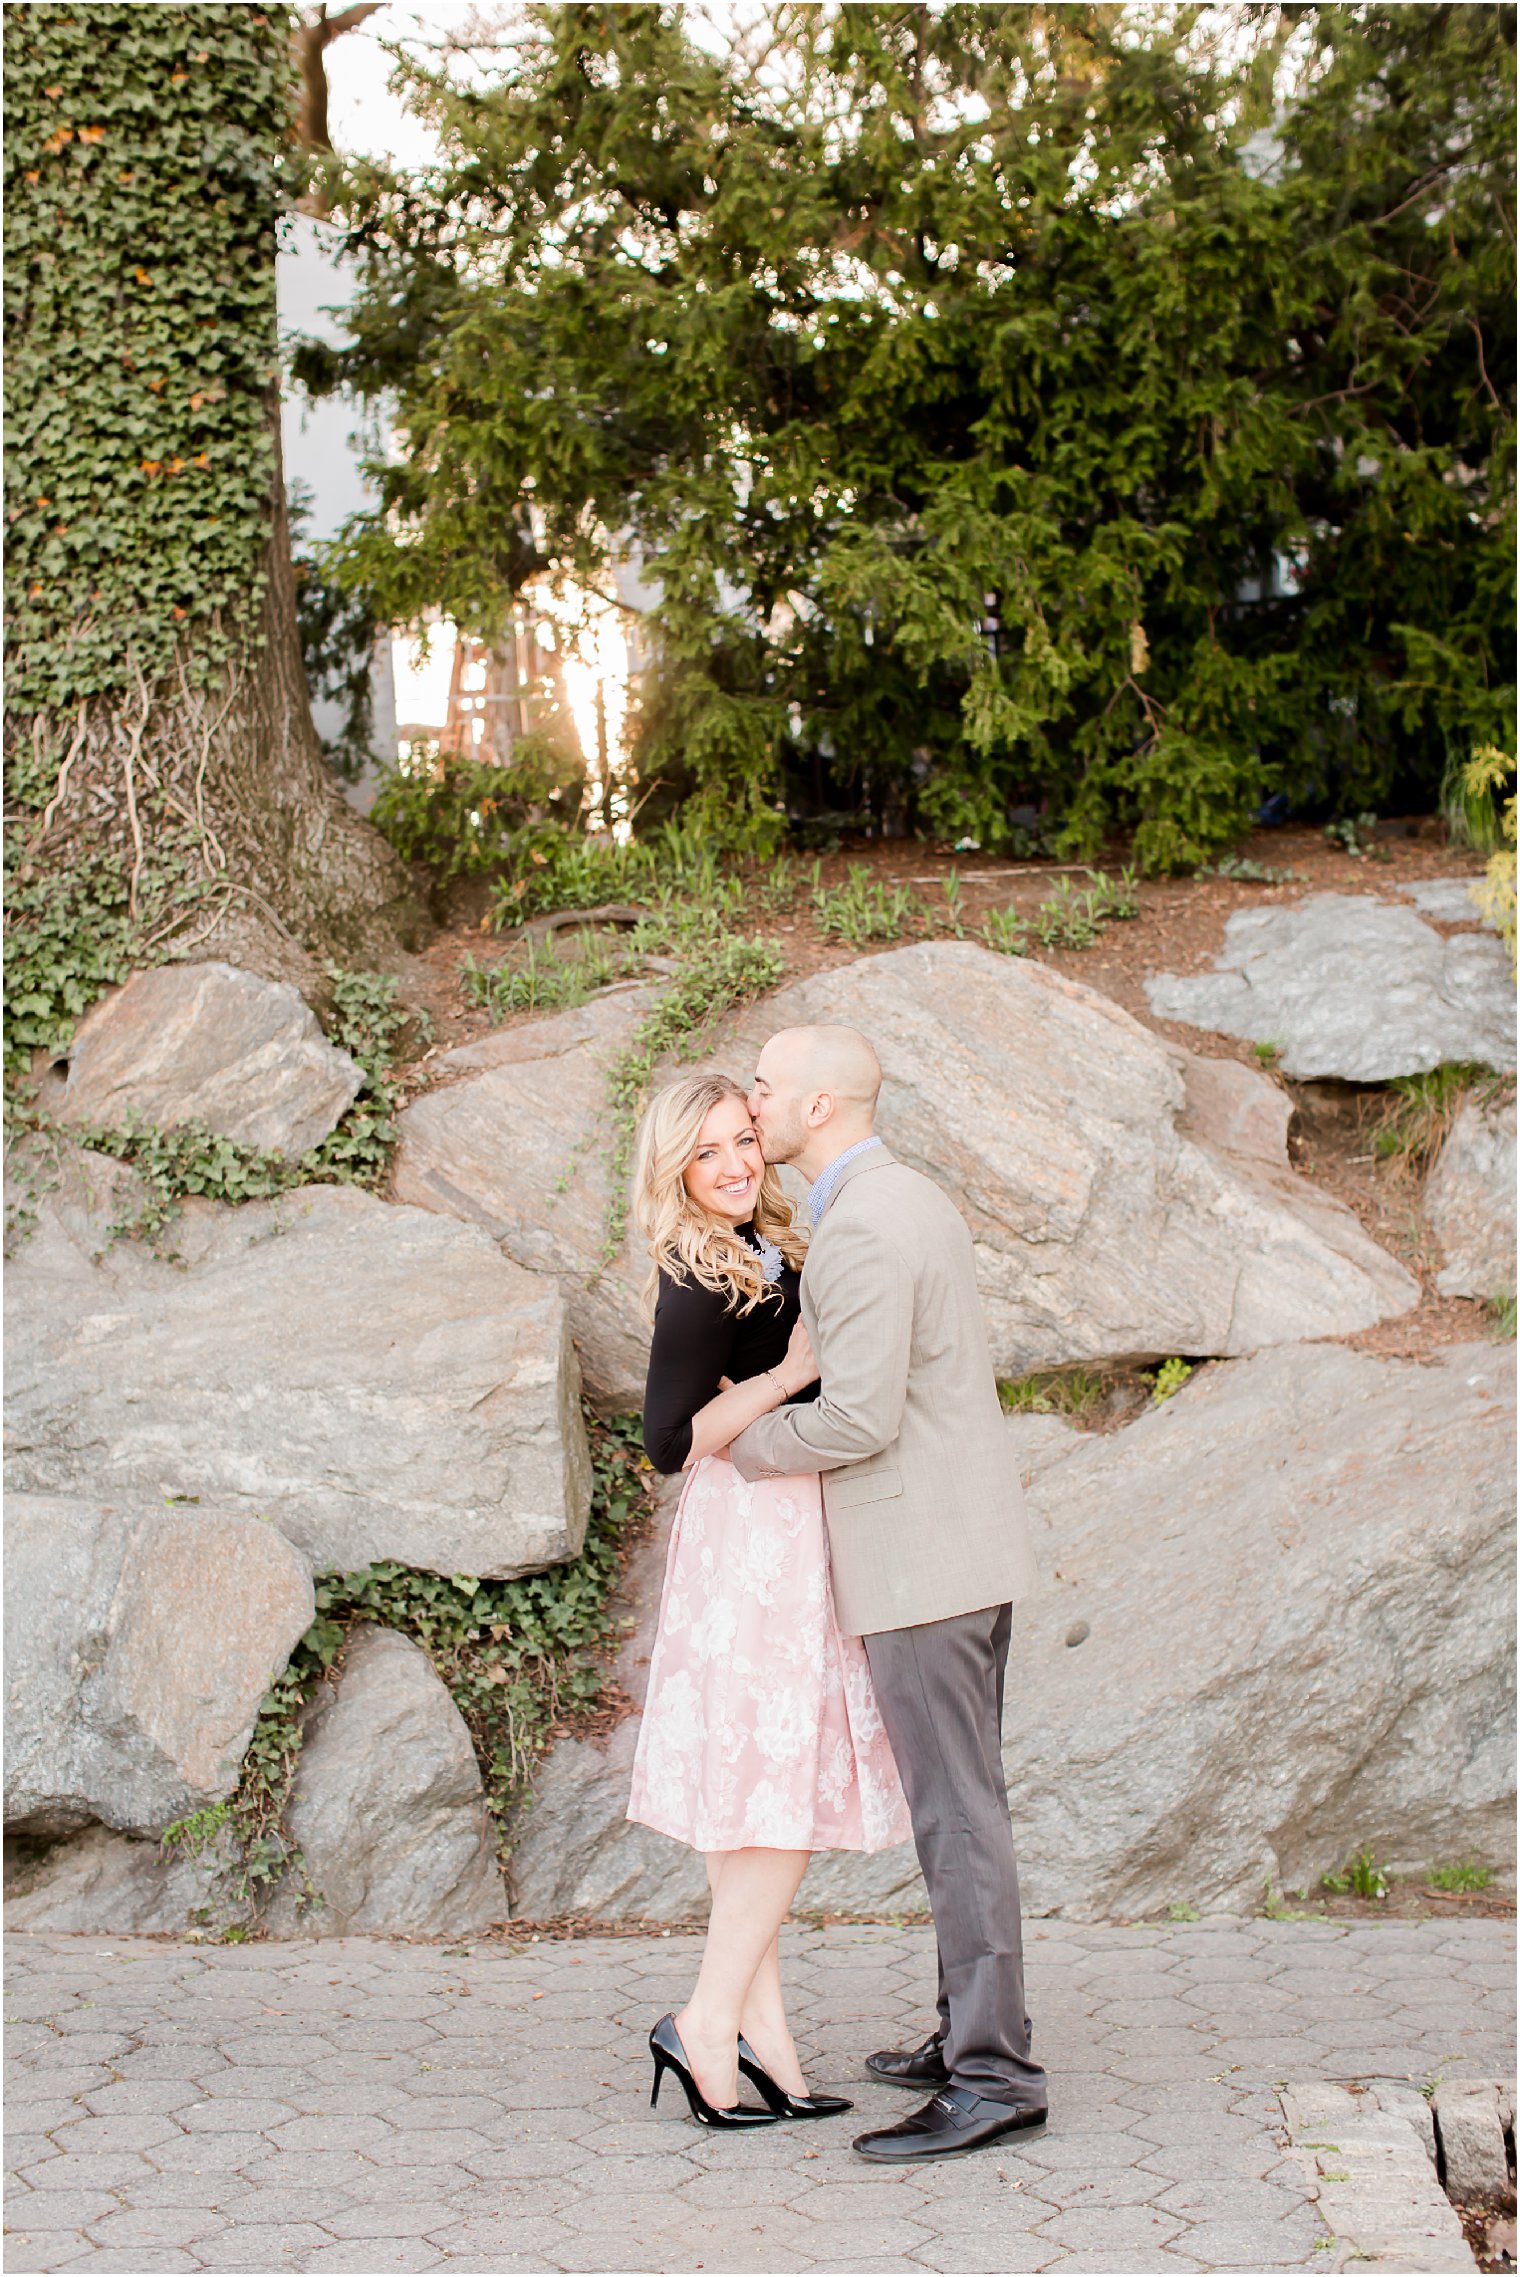 Romantic engagement session in NYC | Photos by Idalia Photography